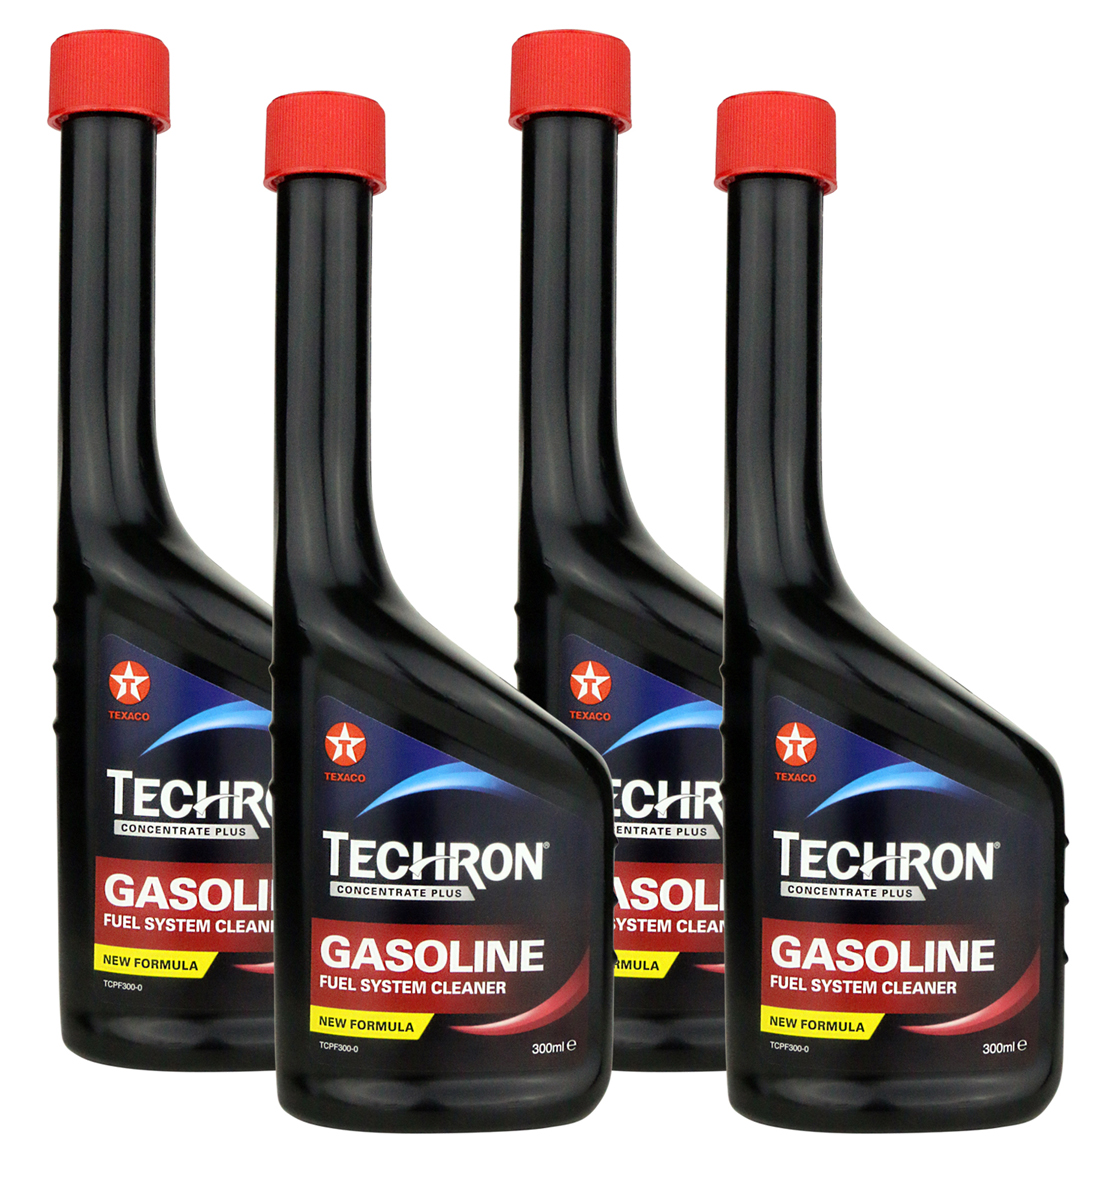 Techron PEA Concentrate Plus Petrol Fuel Injector System Cleaner - Pack of 4